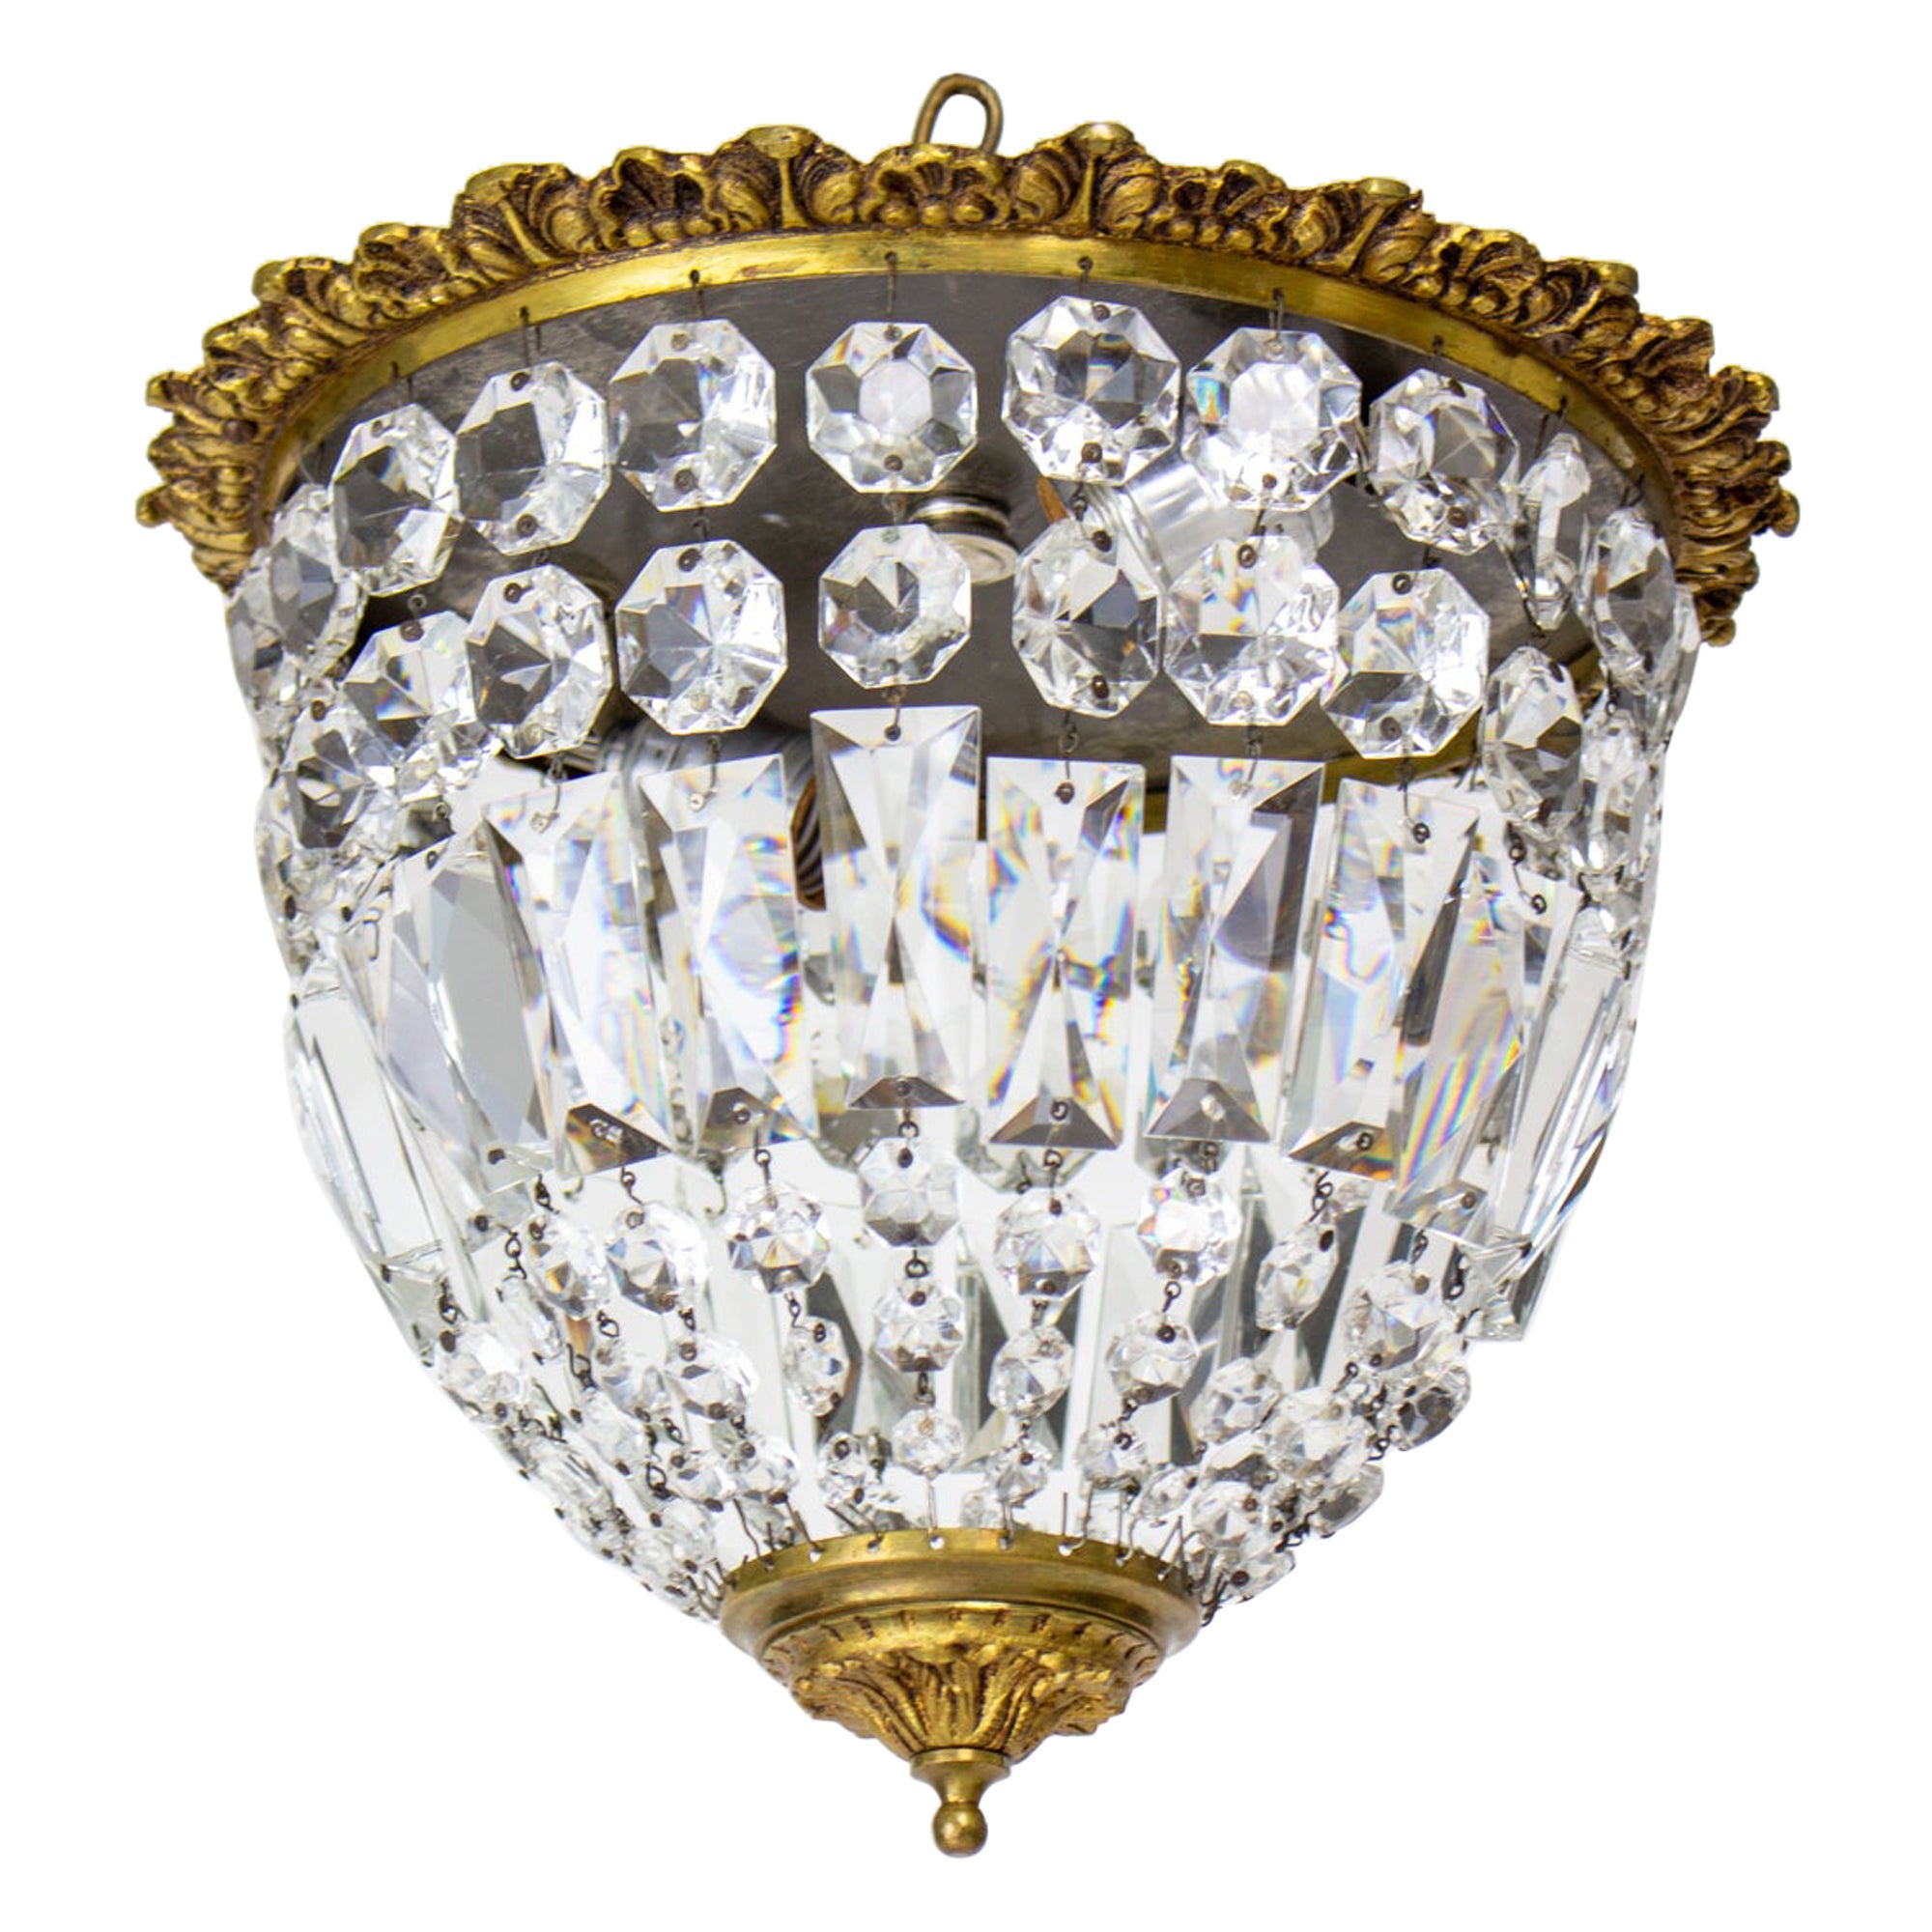 Mid 20th Century Brass and Crystal Basket Flush Mount Fixture